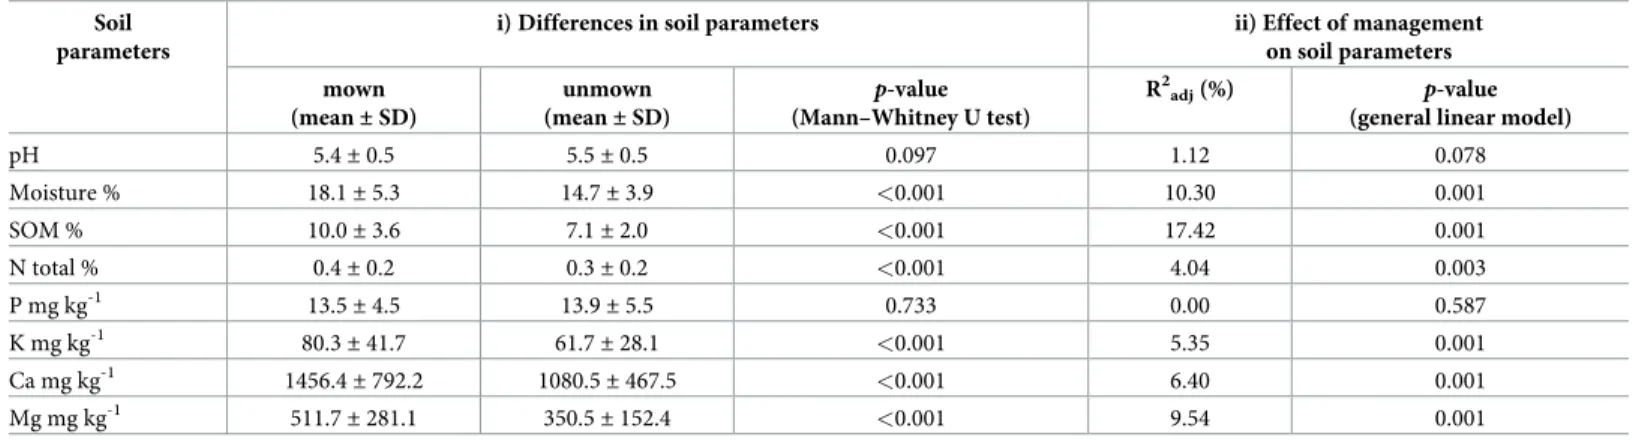 Table 3. Comparison of soil physico-chemical parameters between mown and unmown sites and the effect of management on soil parameters.